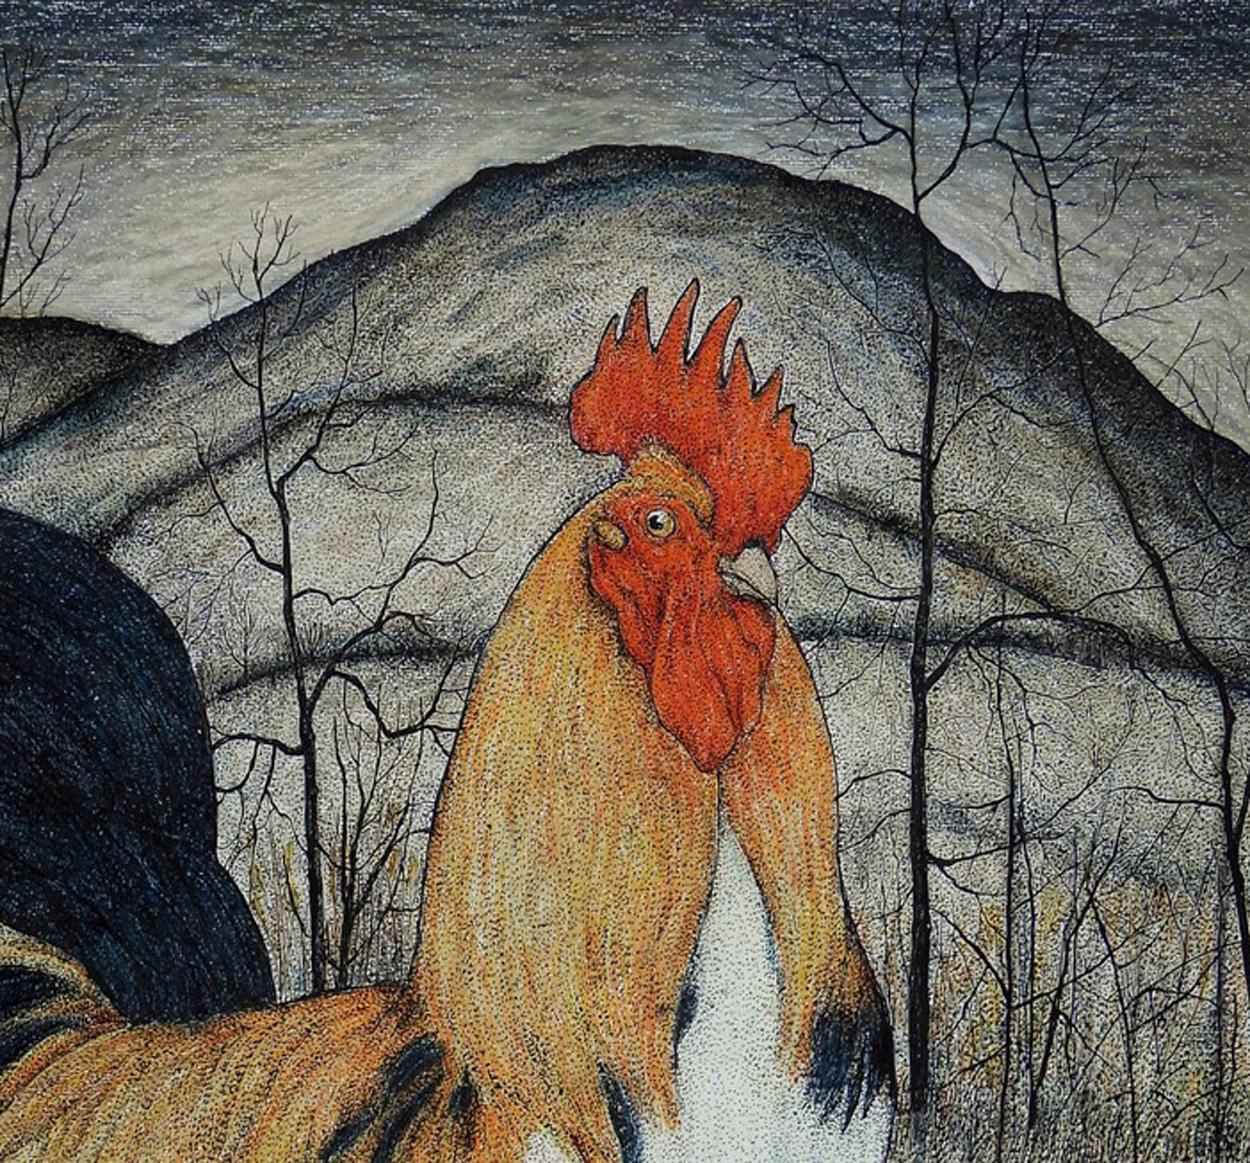 Roving Rooster - New original work by Seren Bell. Mixed media on Fabriano paper, 17 inches x 21 inches.

Sold unframed. Can be framed for local buyers.

Seren's work is widely collected in the UK and globally.

For more than seven hundred